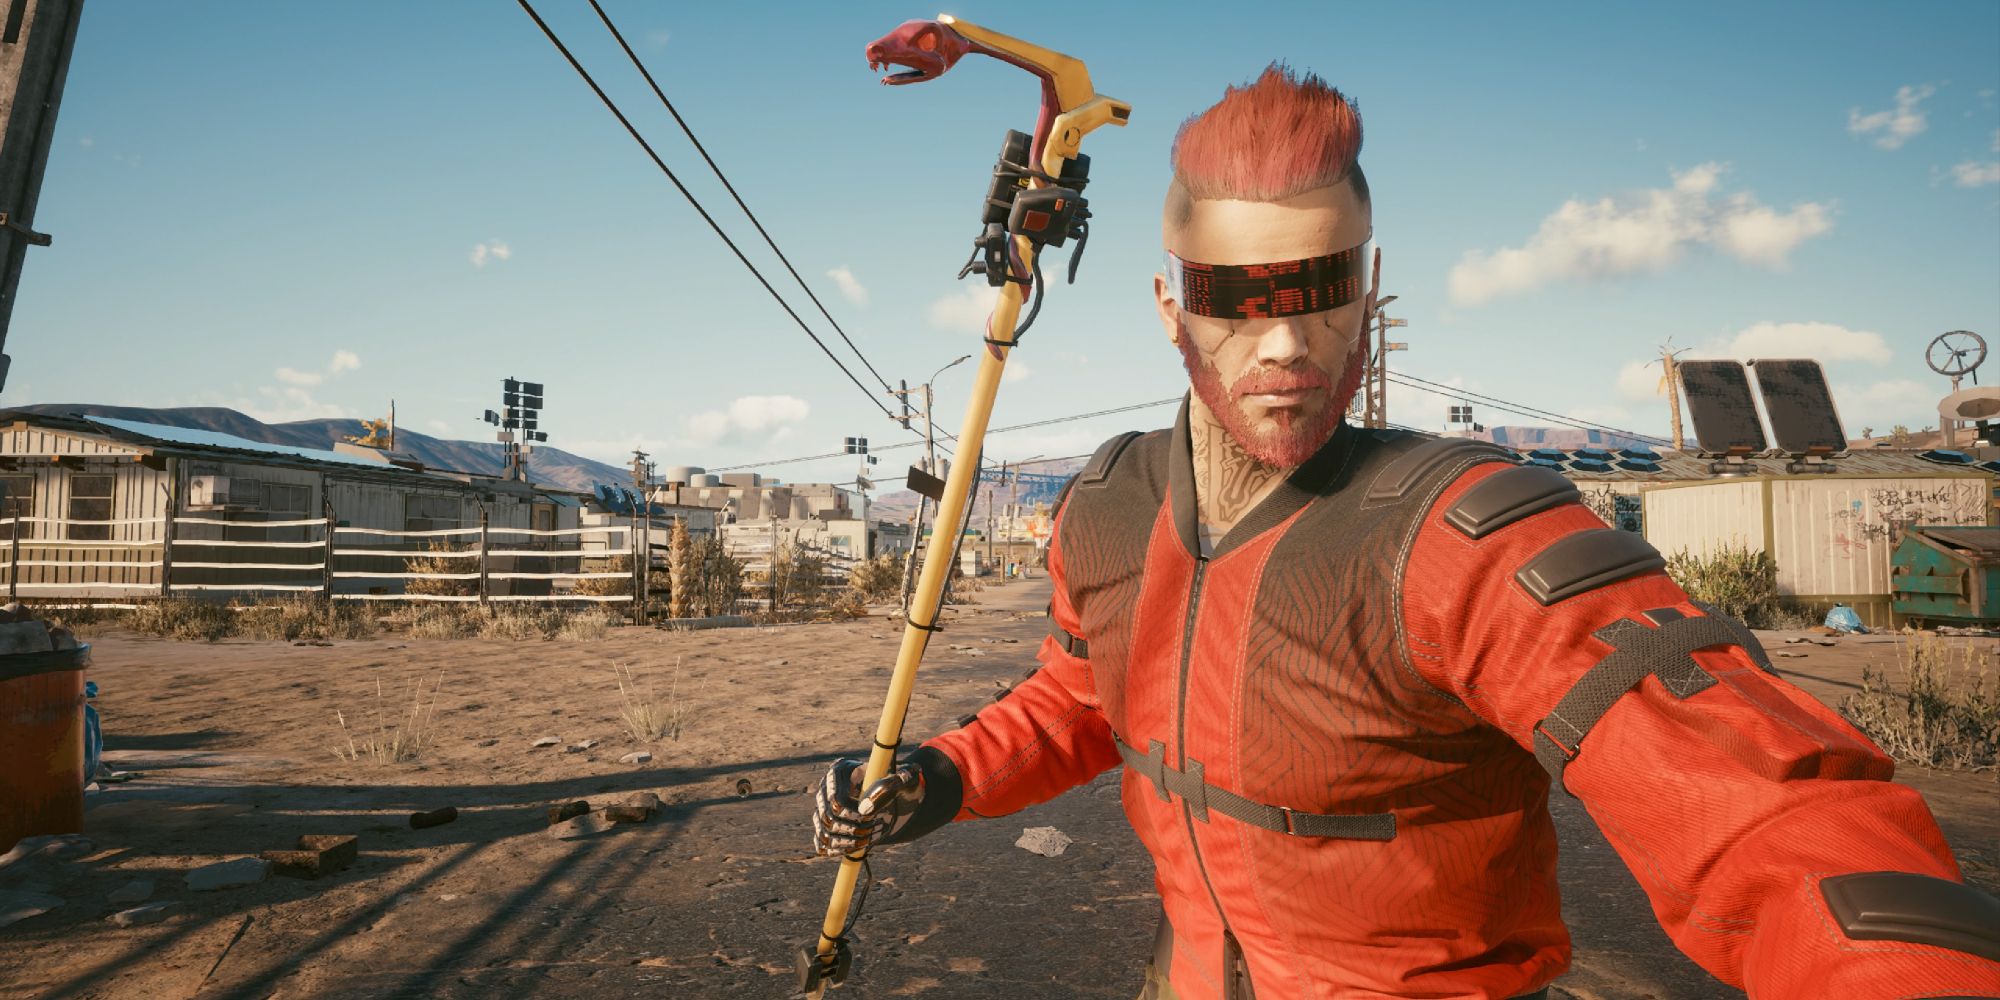 An image of V from Cyberpunk 2077 wielding the iconic Cottonmouth melee weapon that deals electric damage